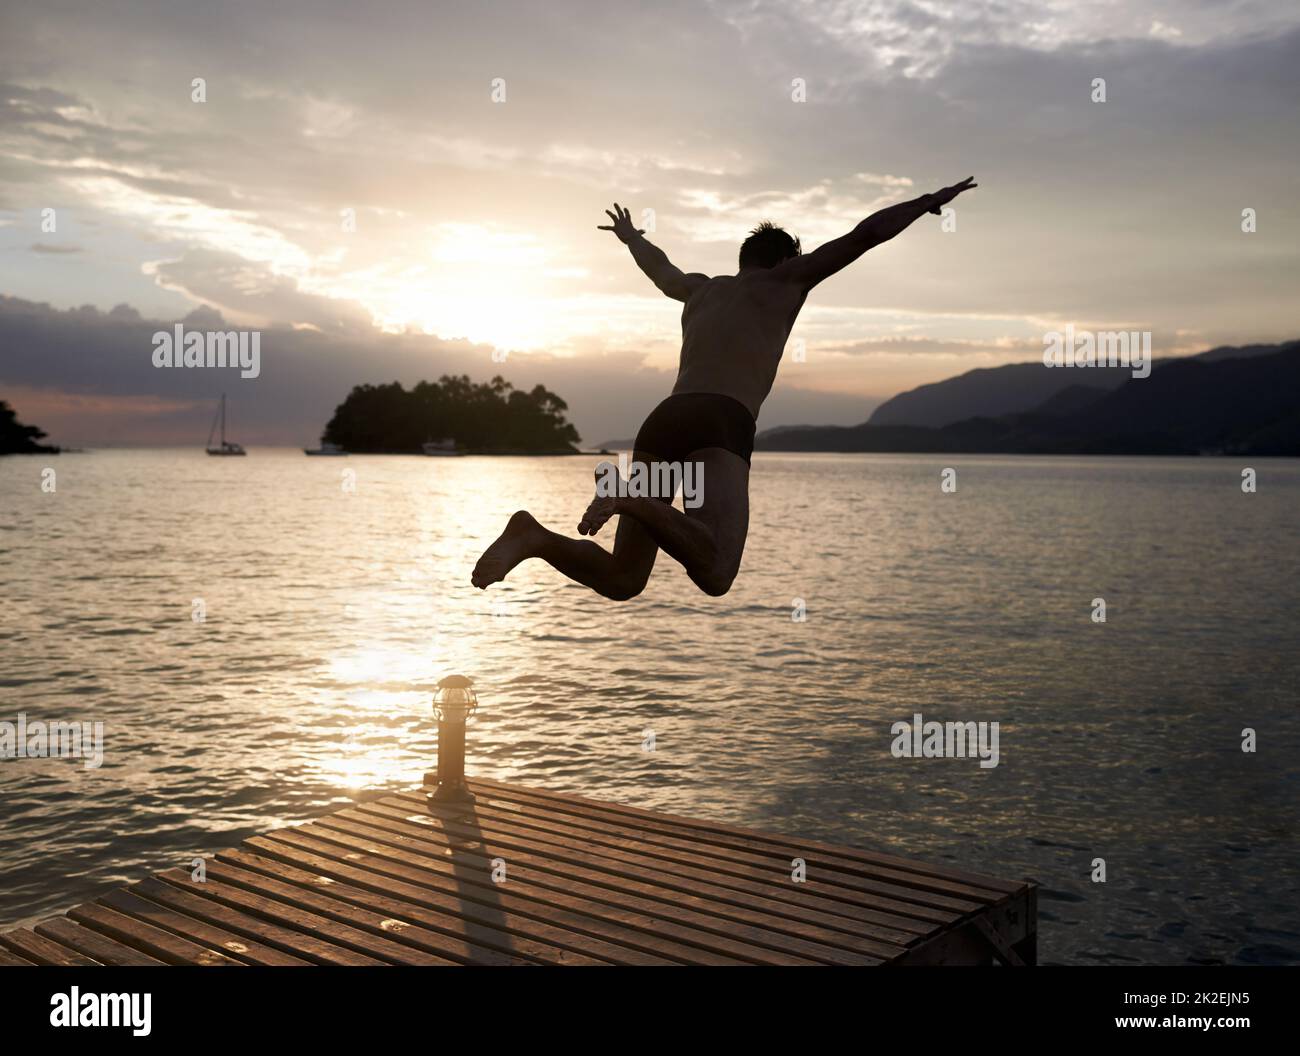 Spontaneity at sunset. Rear view shot of a young man diving off the jetty into a lake at sunset. Stock Photo